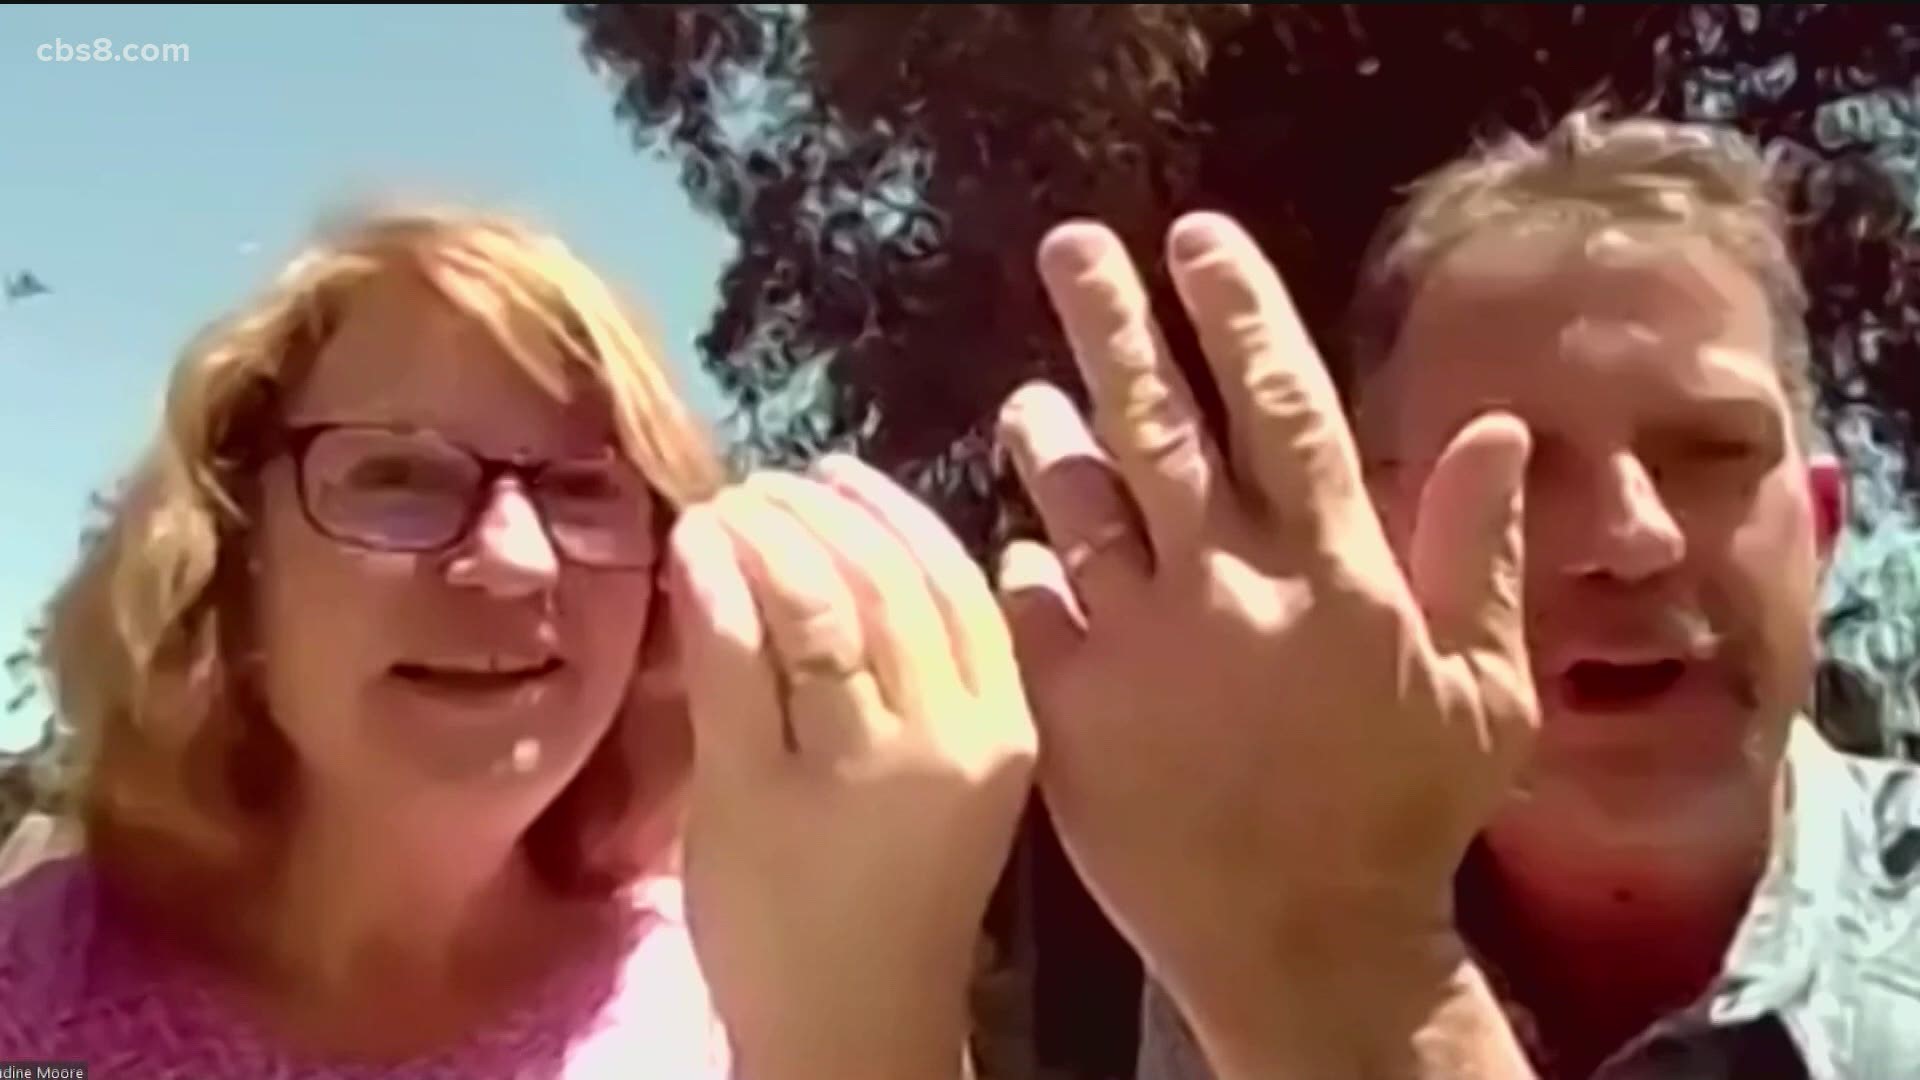 A Valley Center couple had to pawn their wedding rings while waiting for EDD claims.